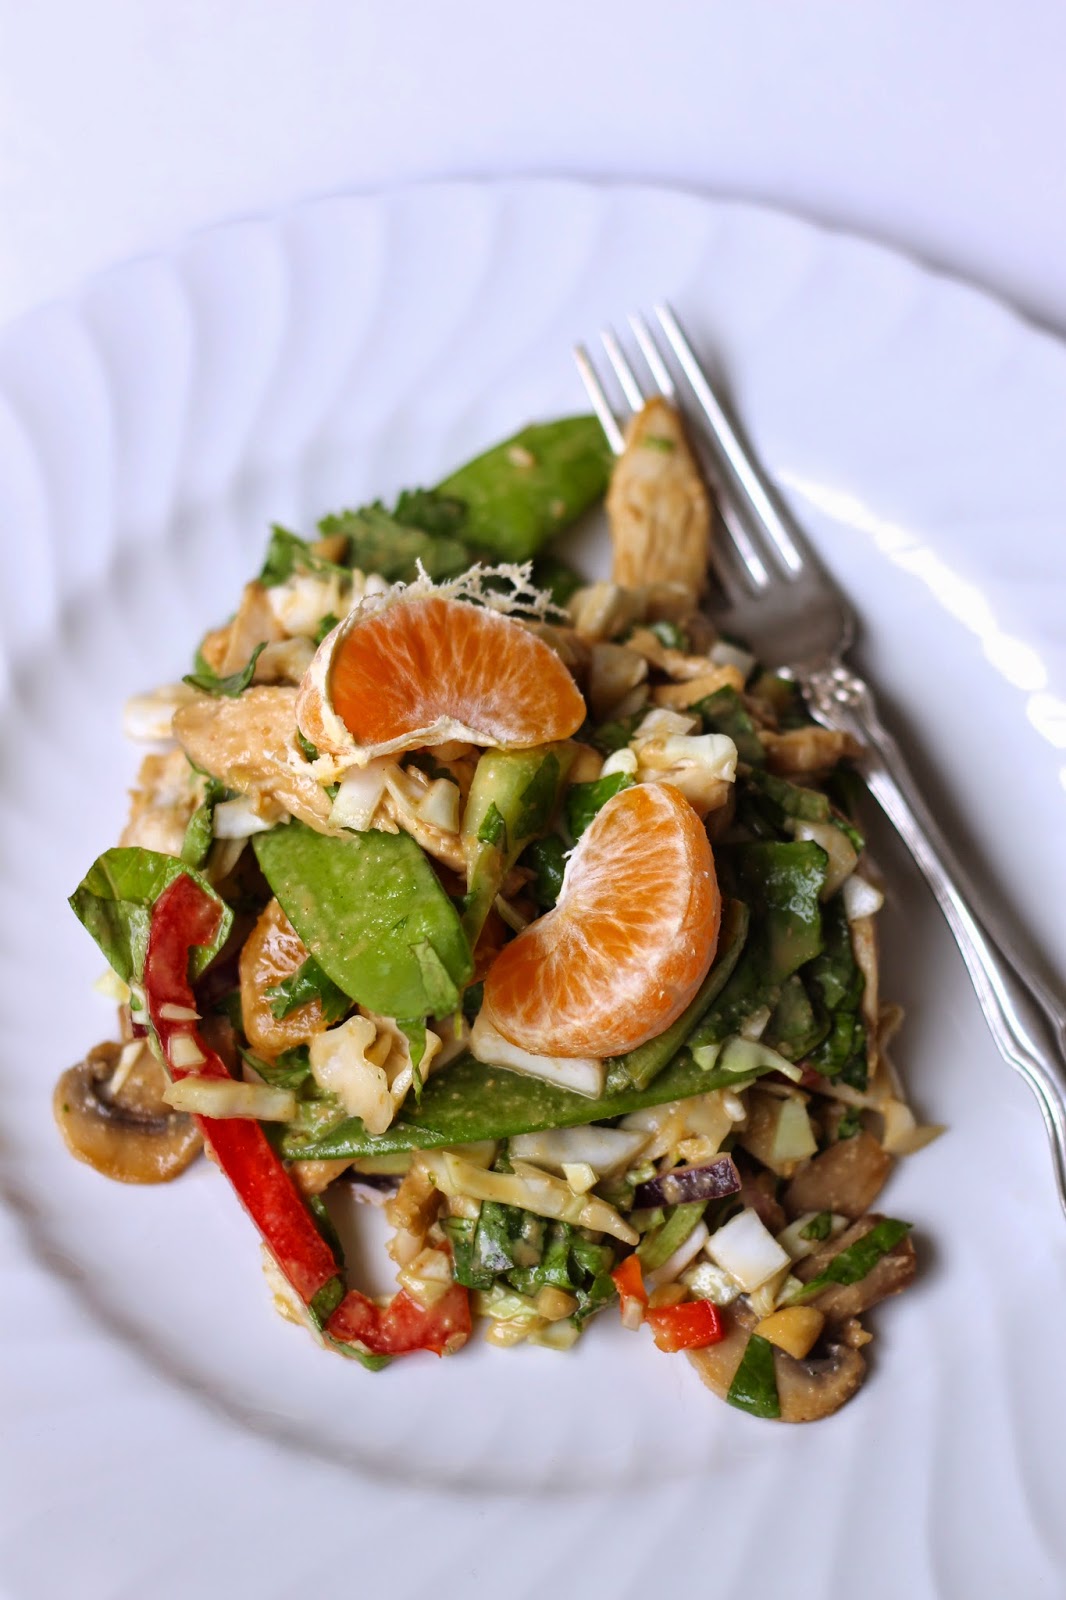 Where Your Treasure Is: Asian Chicken Salad with Peanut Dressing